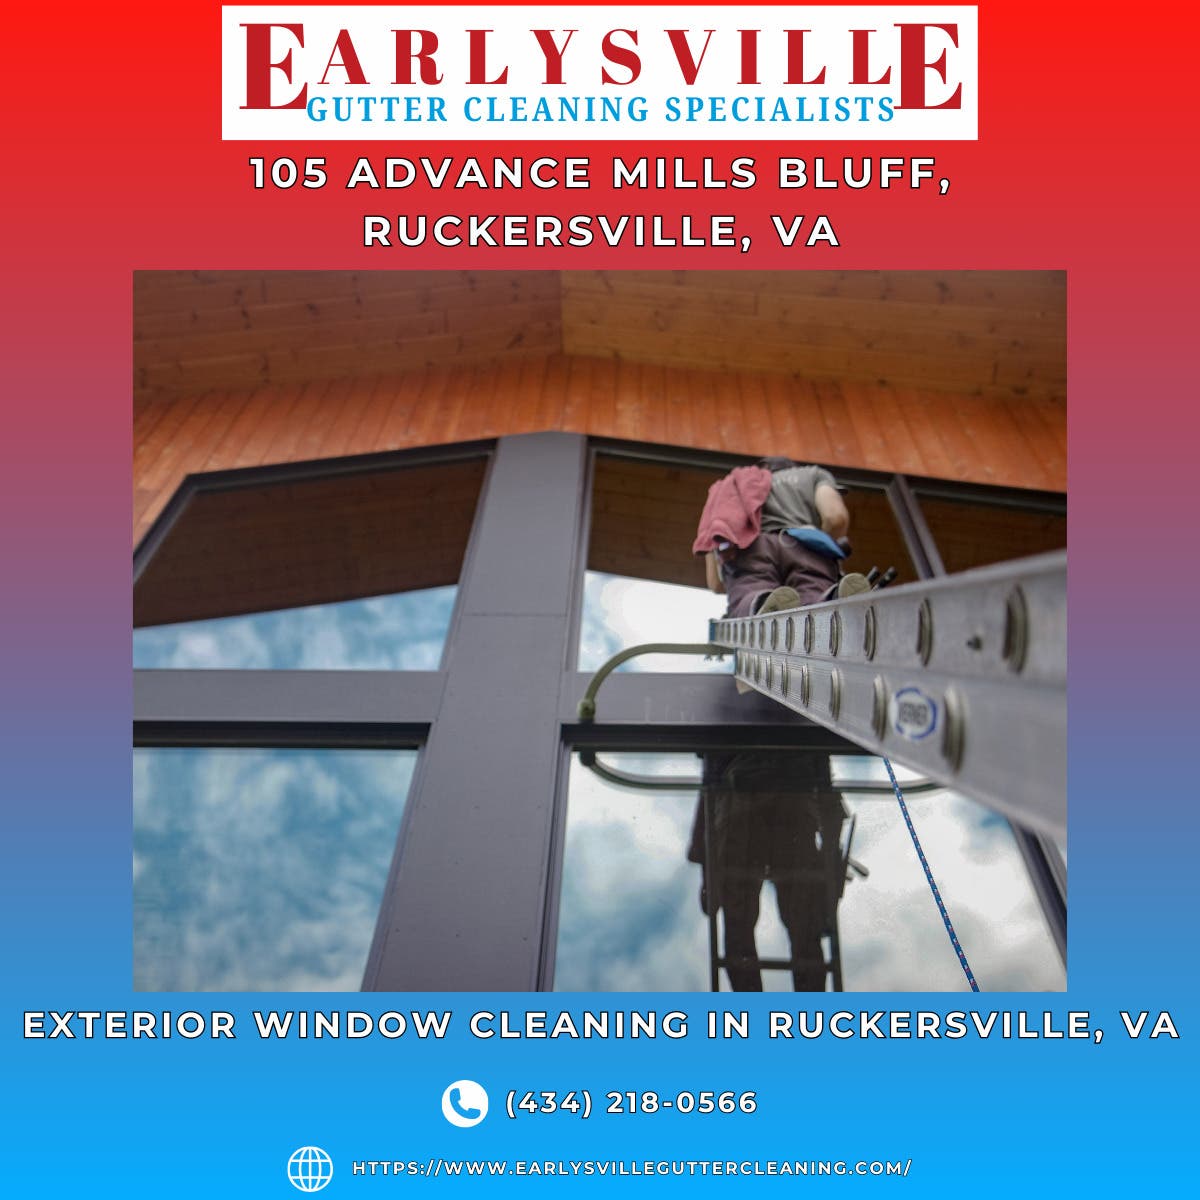 Exterior Window Cleaning in Ruckersville, VA - Earlysville Gutter Cleaning Specialists